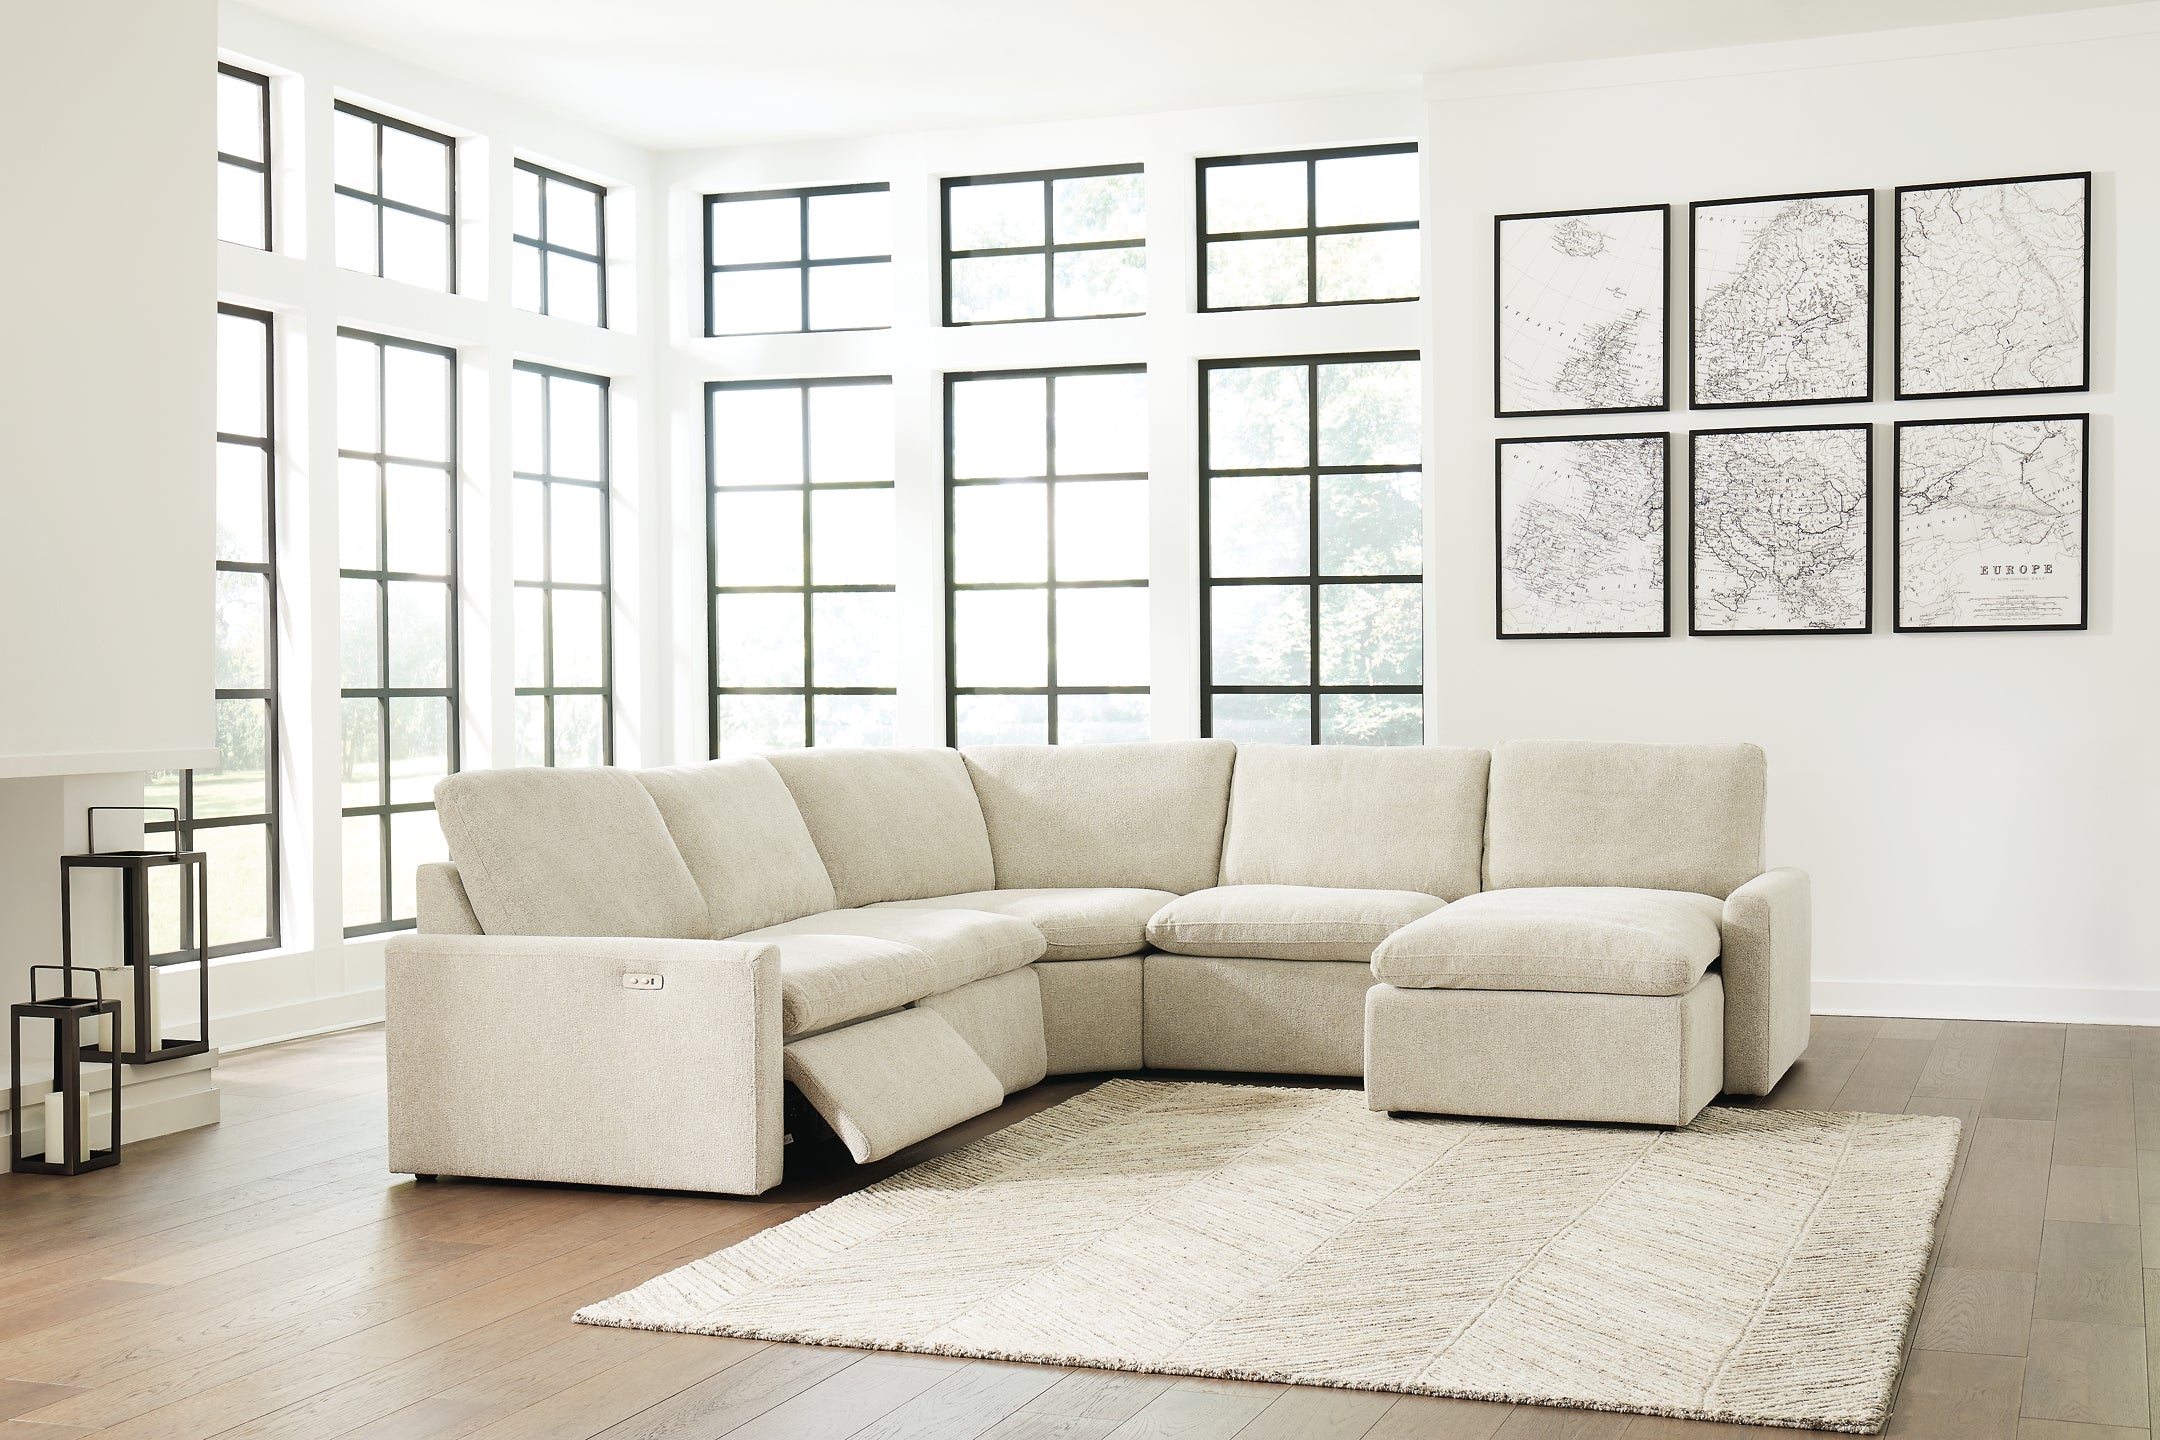 Hartsdale 5-Piece Power Reclining Sectional with Chaise